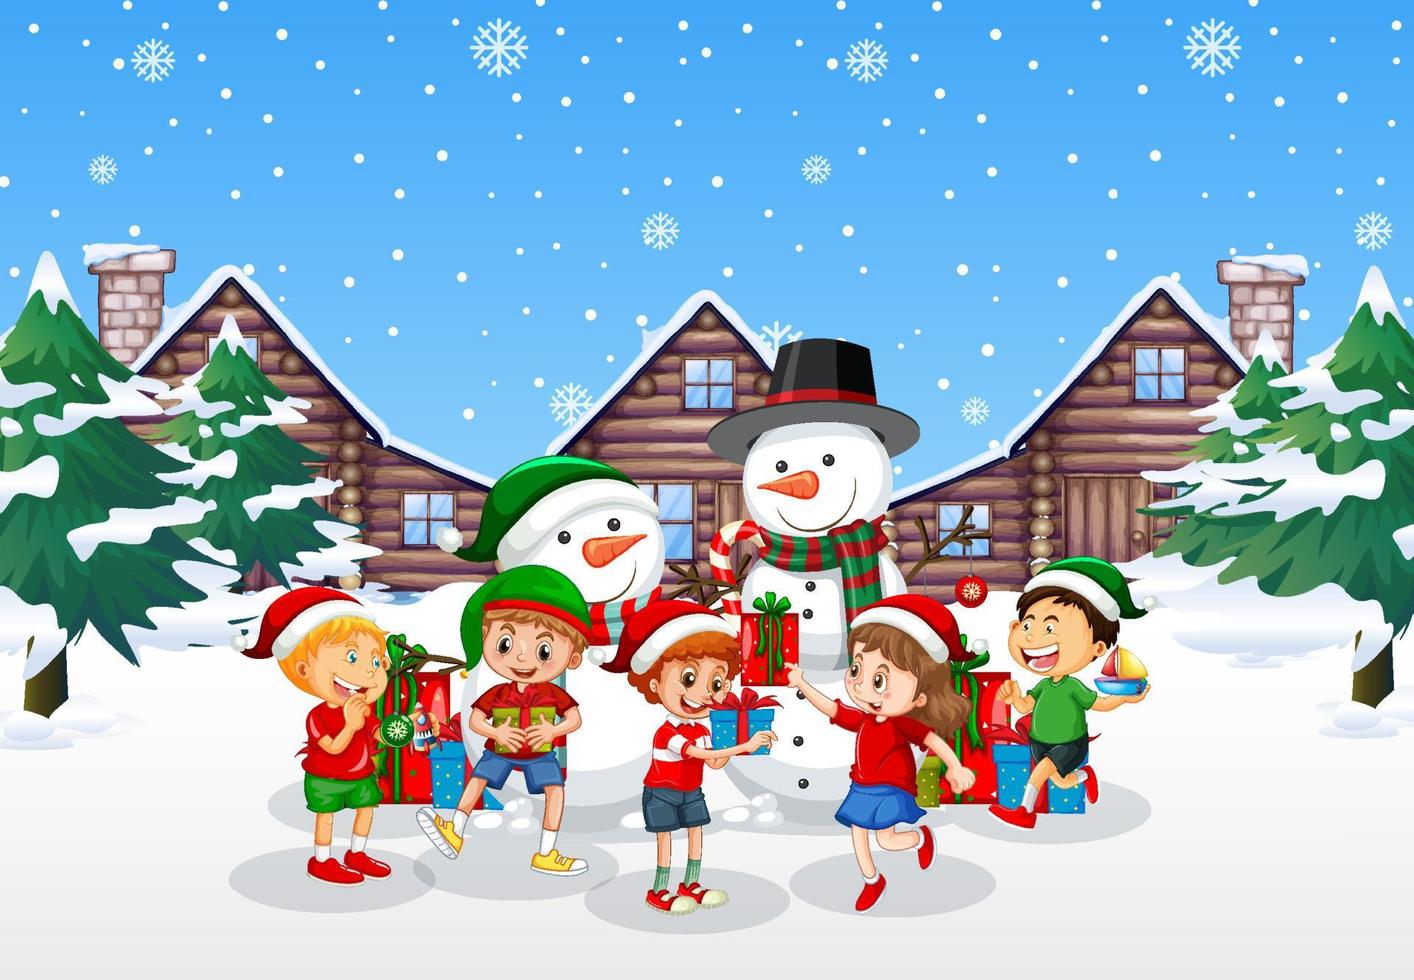 Christmas with children on snowy blue background vector